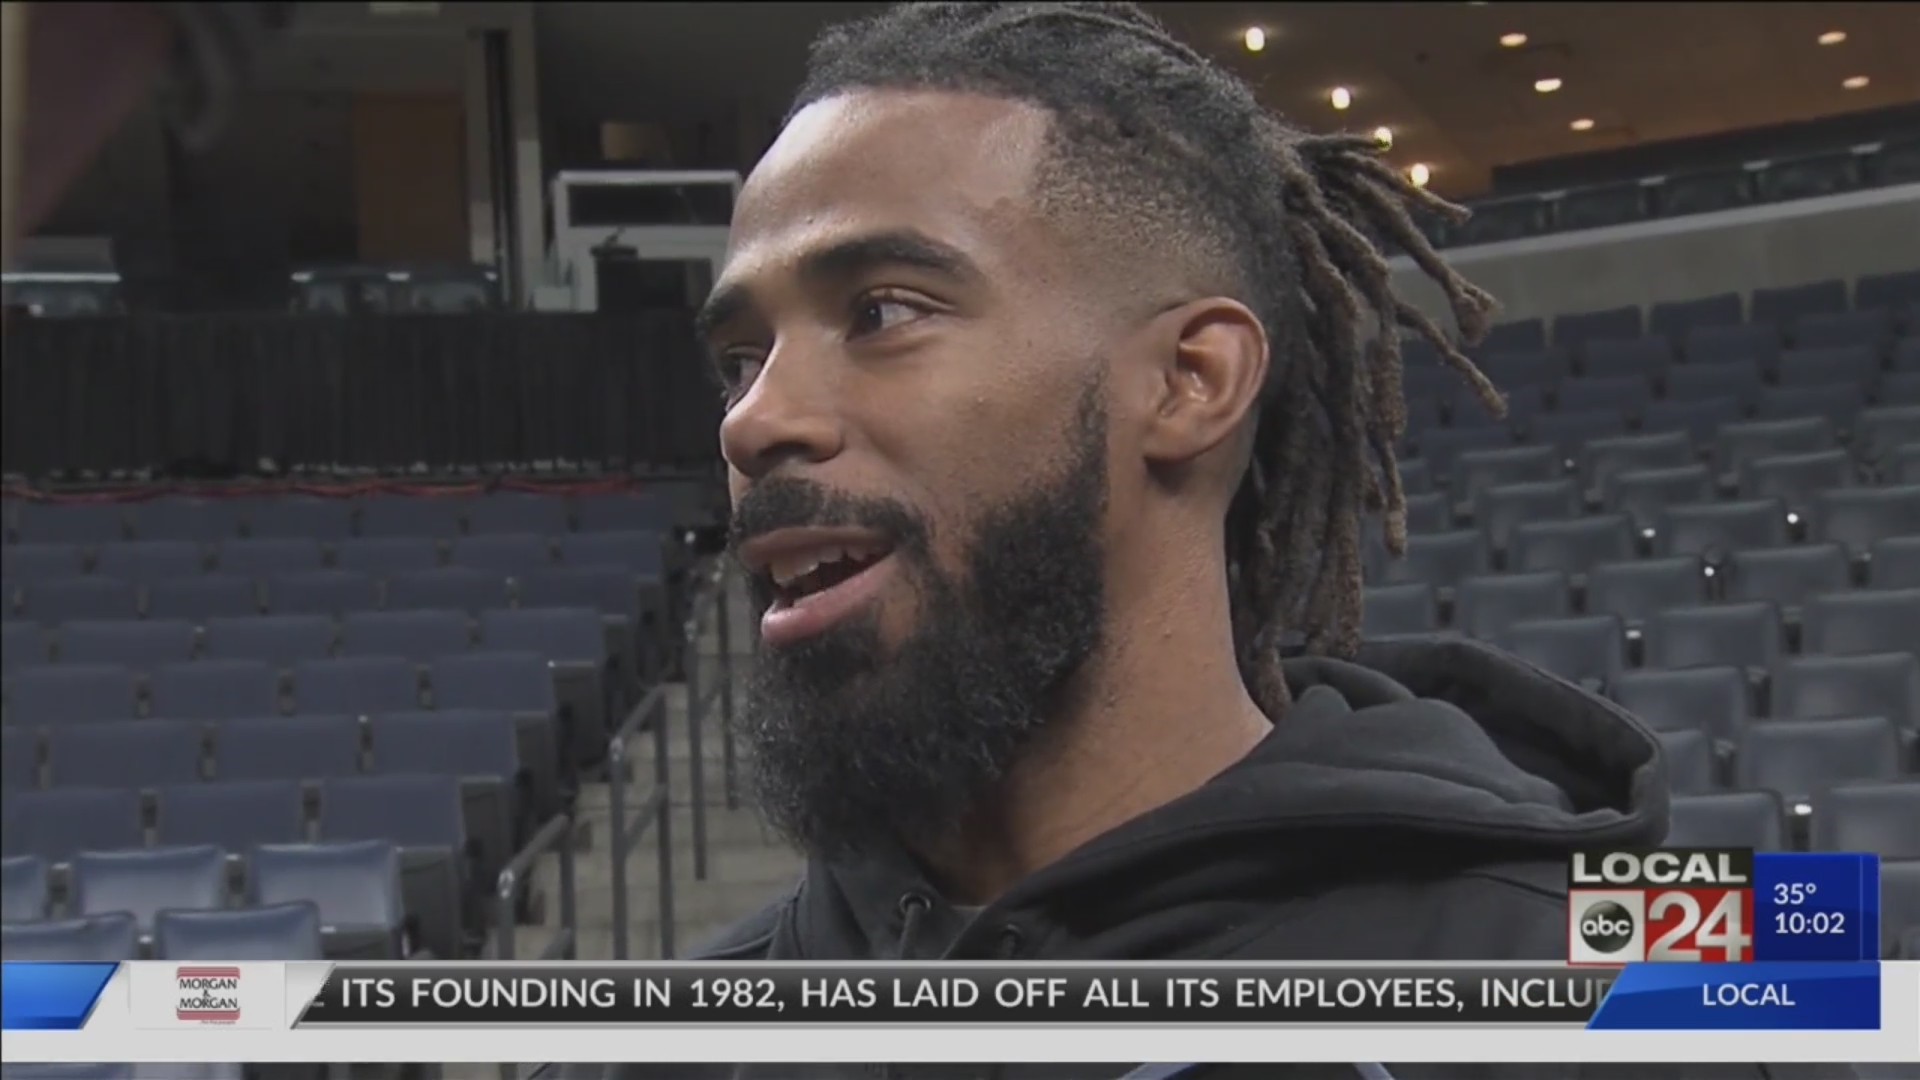 Fans welcome former Grizzlies star Mike Conley back to FedExForum